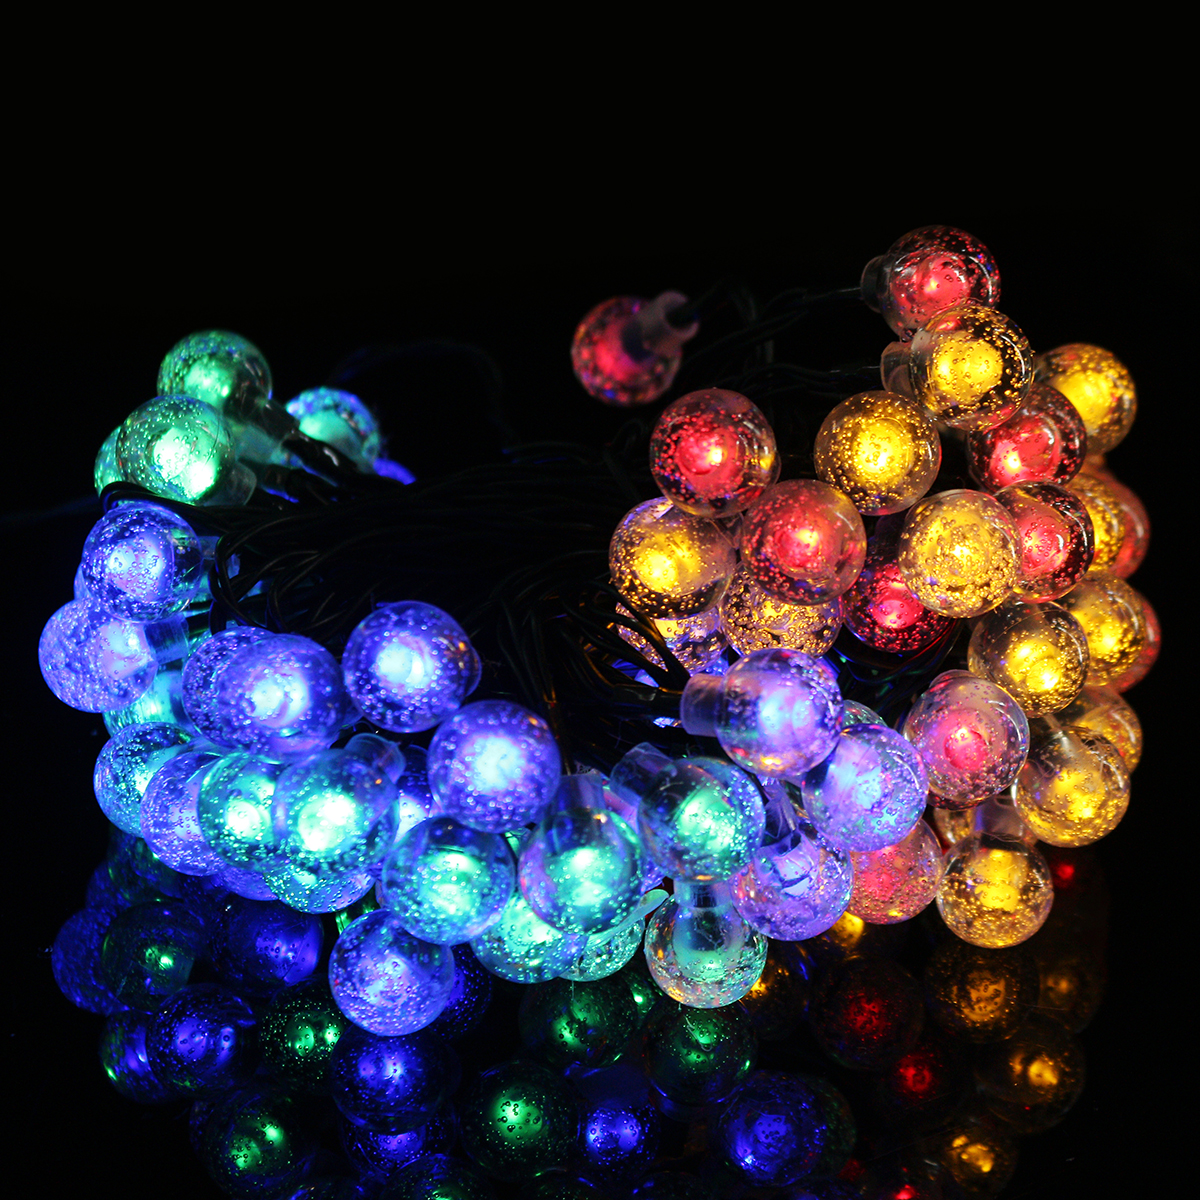 12M-8-Modes-100LED-Solar-String-Light-Crystal-Ball-Fairy-Lamp-Wedding-Holiday-Home-Party-Christmas-T-1568461-9